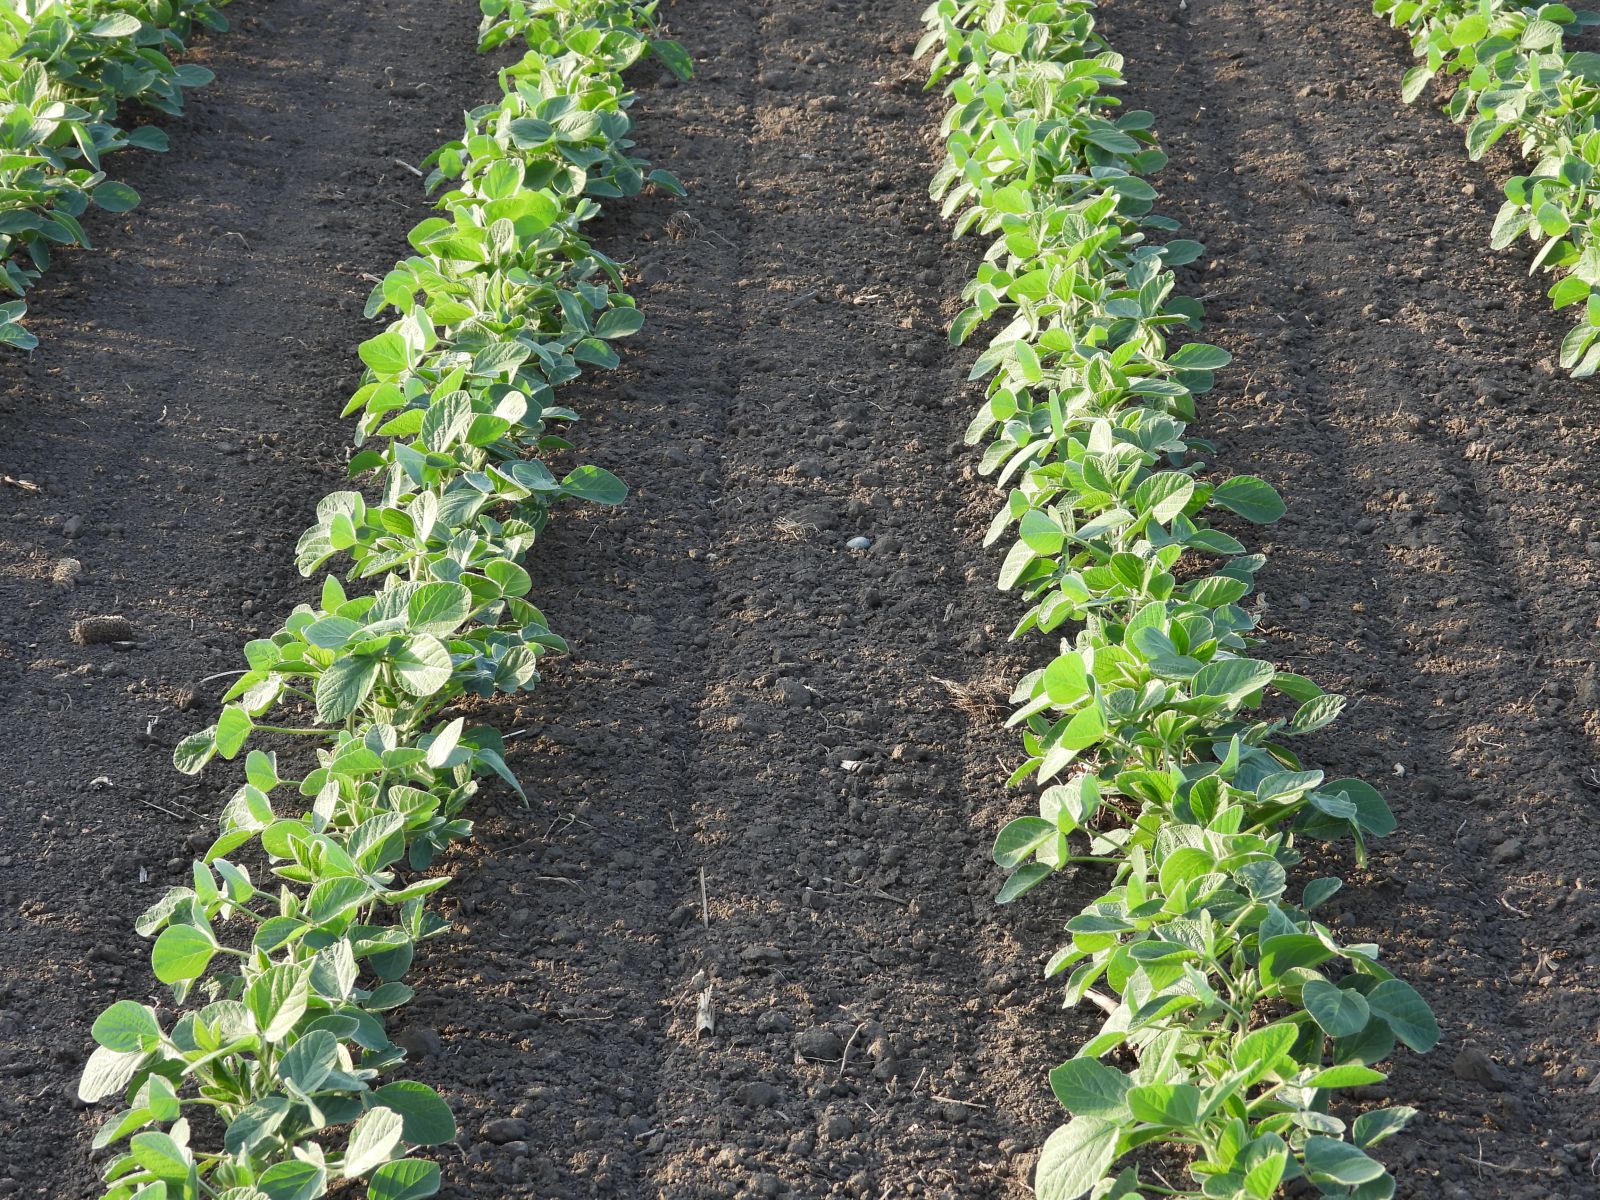 Soybeans - Rows of soybeans in a field by Jana Milin via iStock